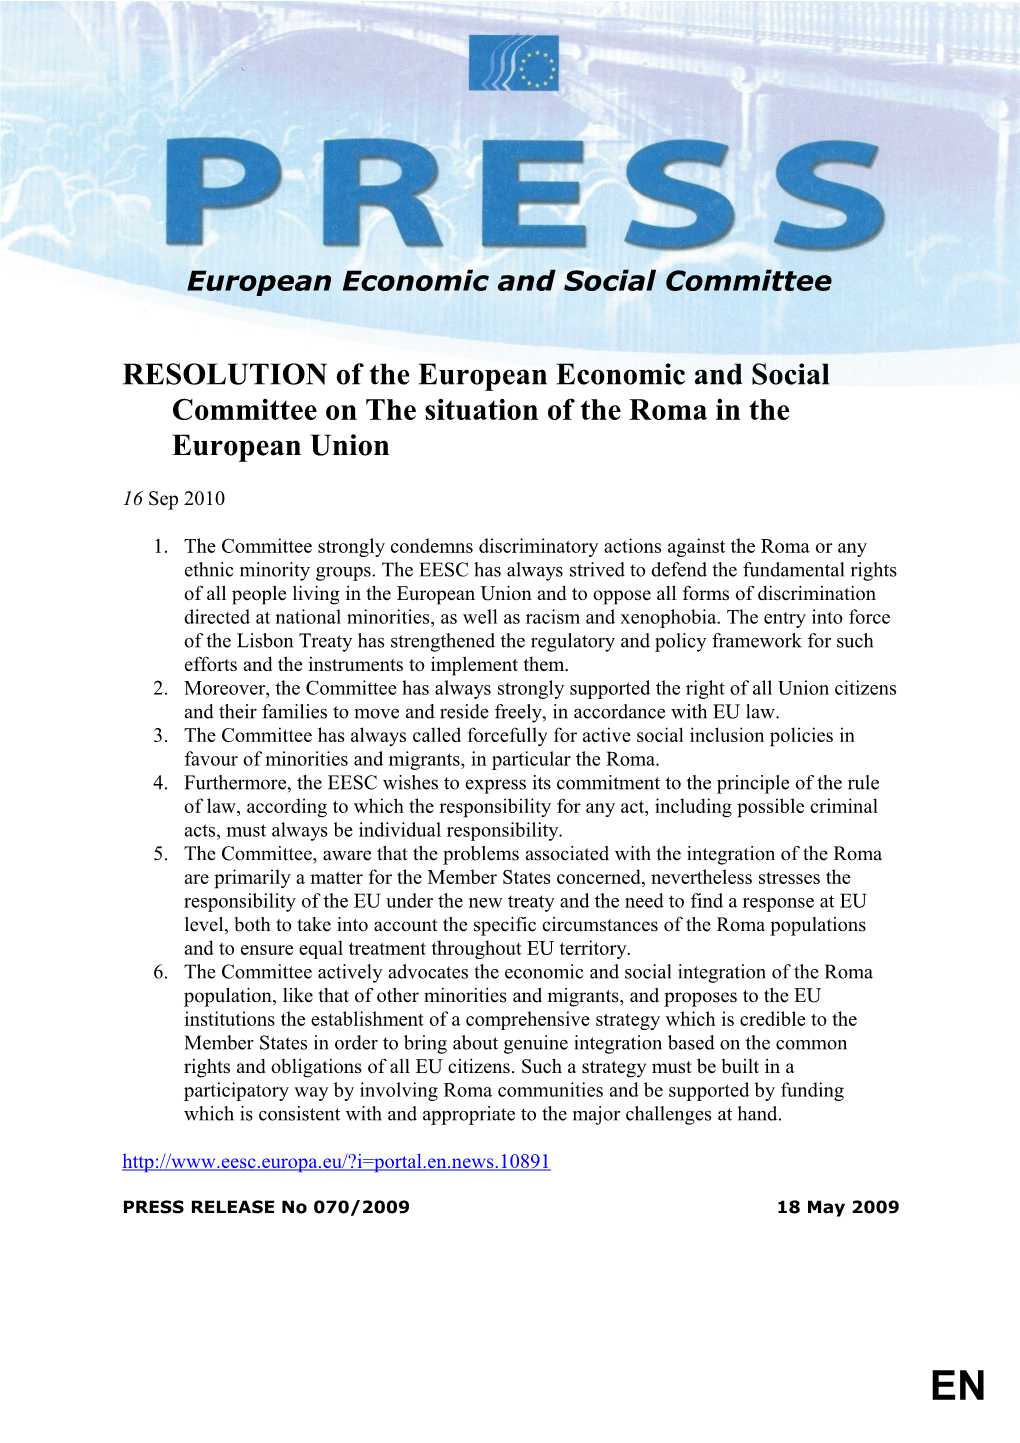 RESOLUTION of the European Economic and Social Committee on the Situation of the Roma In